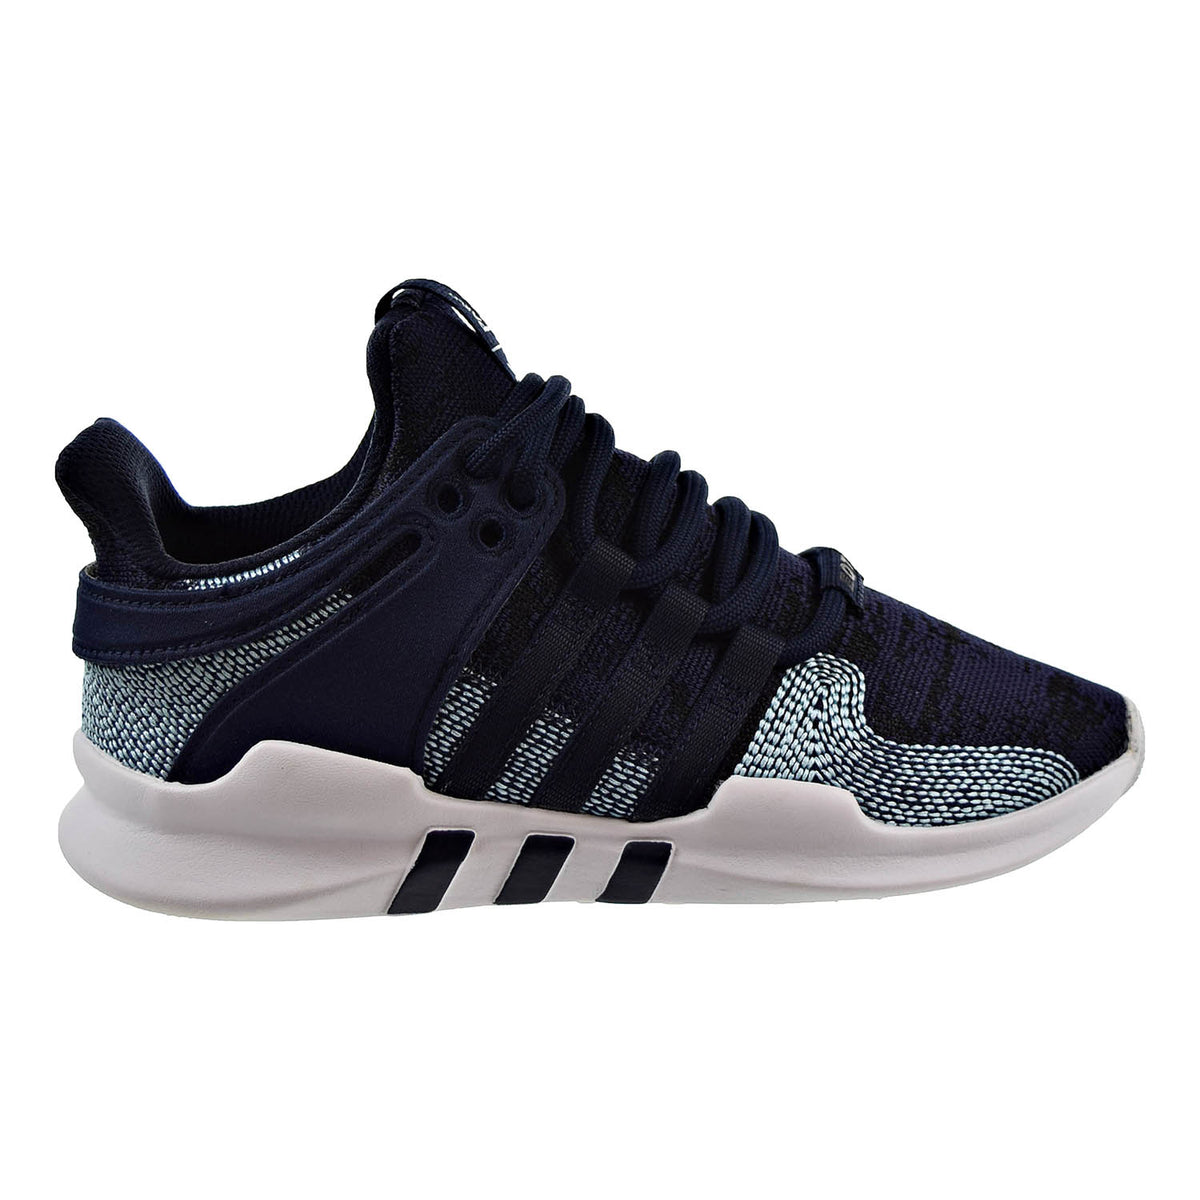 adidas performance eqt support adv ck parley